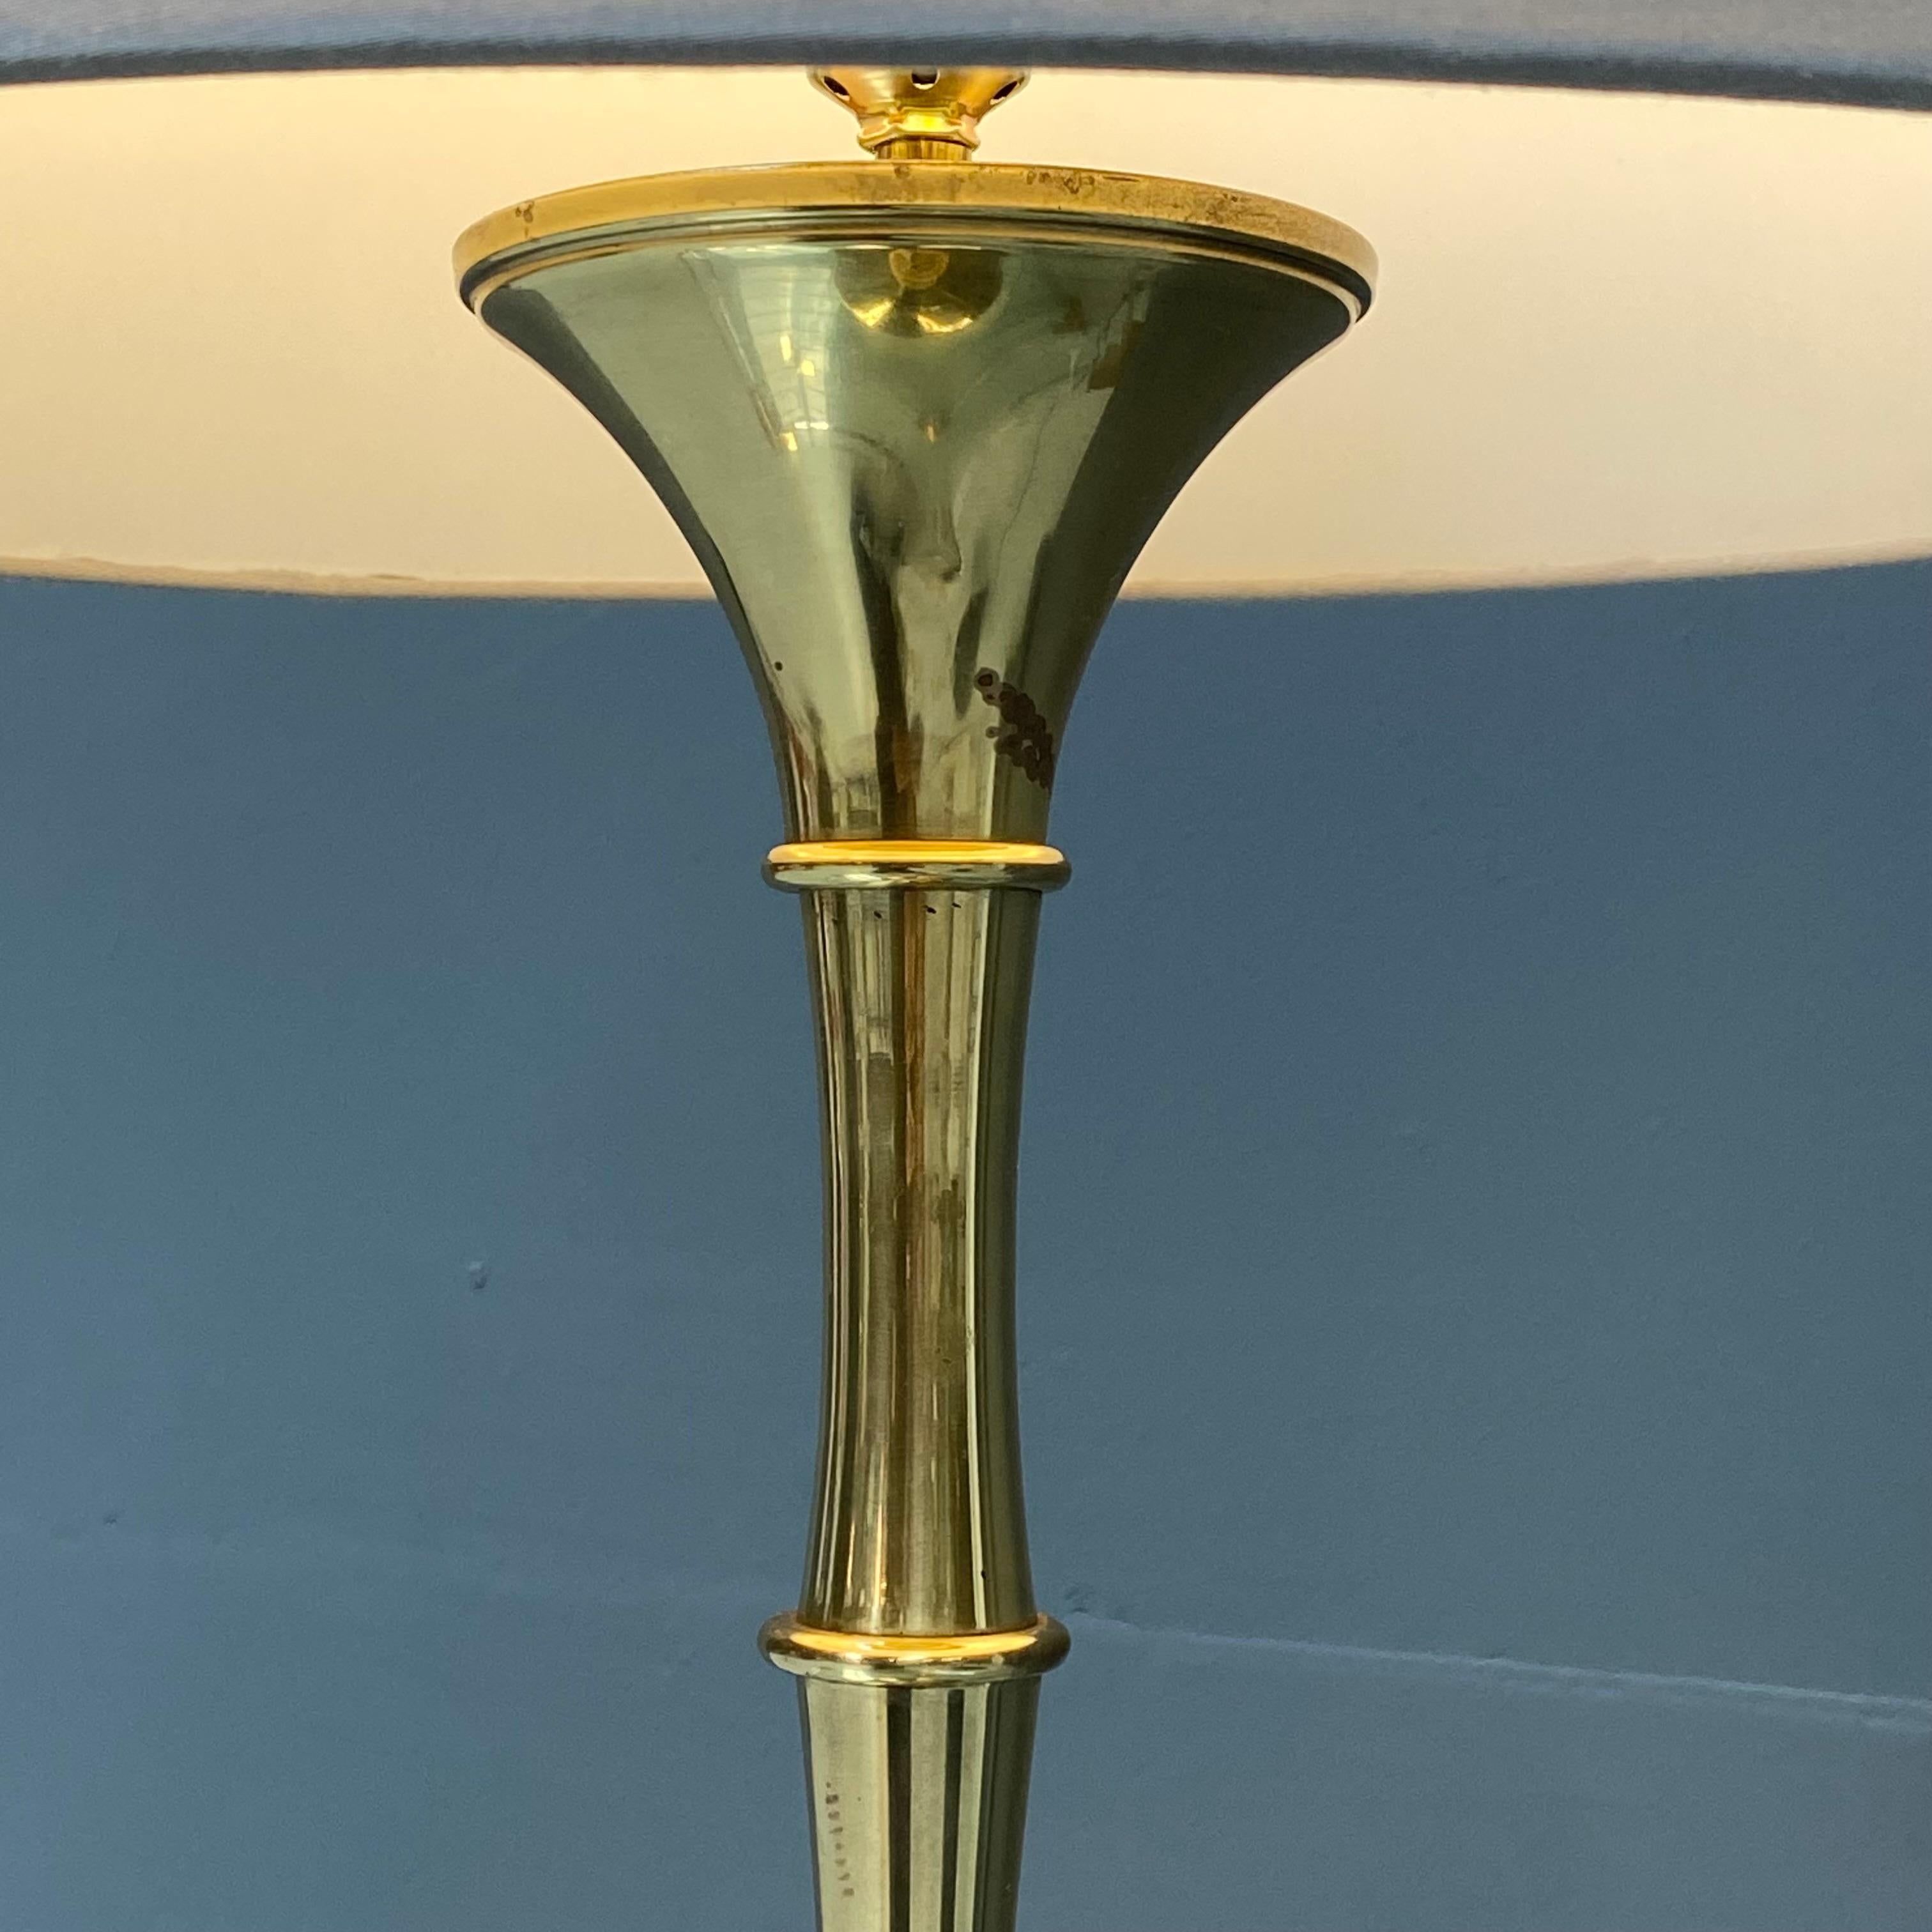 20th Century Vintage Bamboo Table Lamp in Brass by Ingo Maurer for M Design, 1960s. For Sale